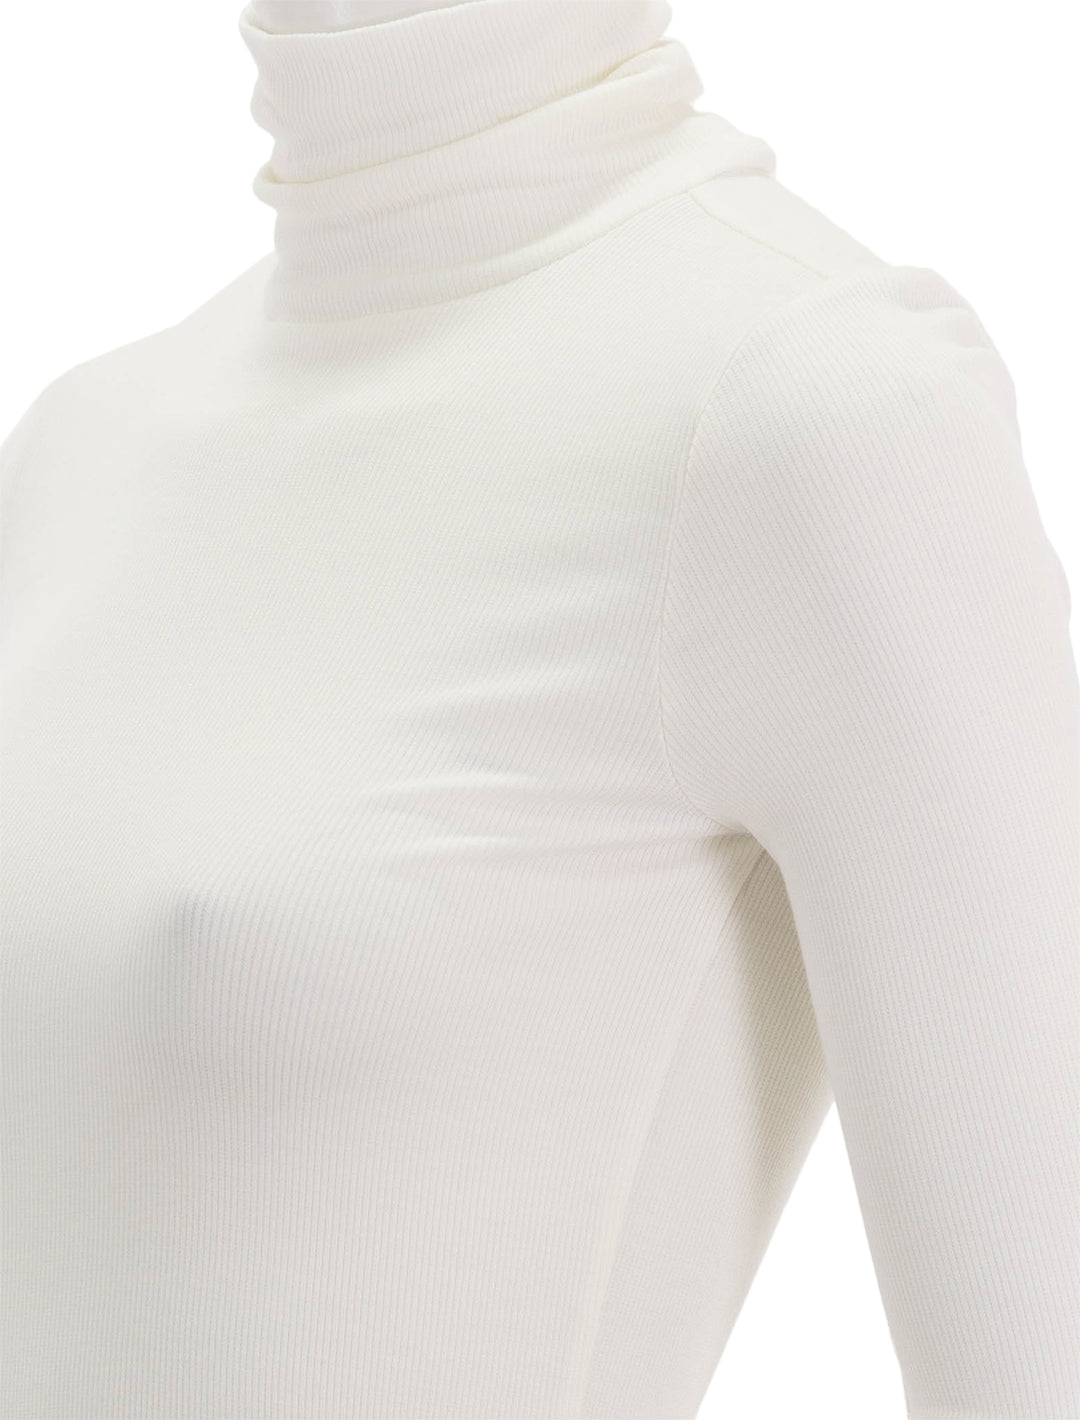 Close-up view of Marine Layer's lexi rib turtleneck in antique white.